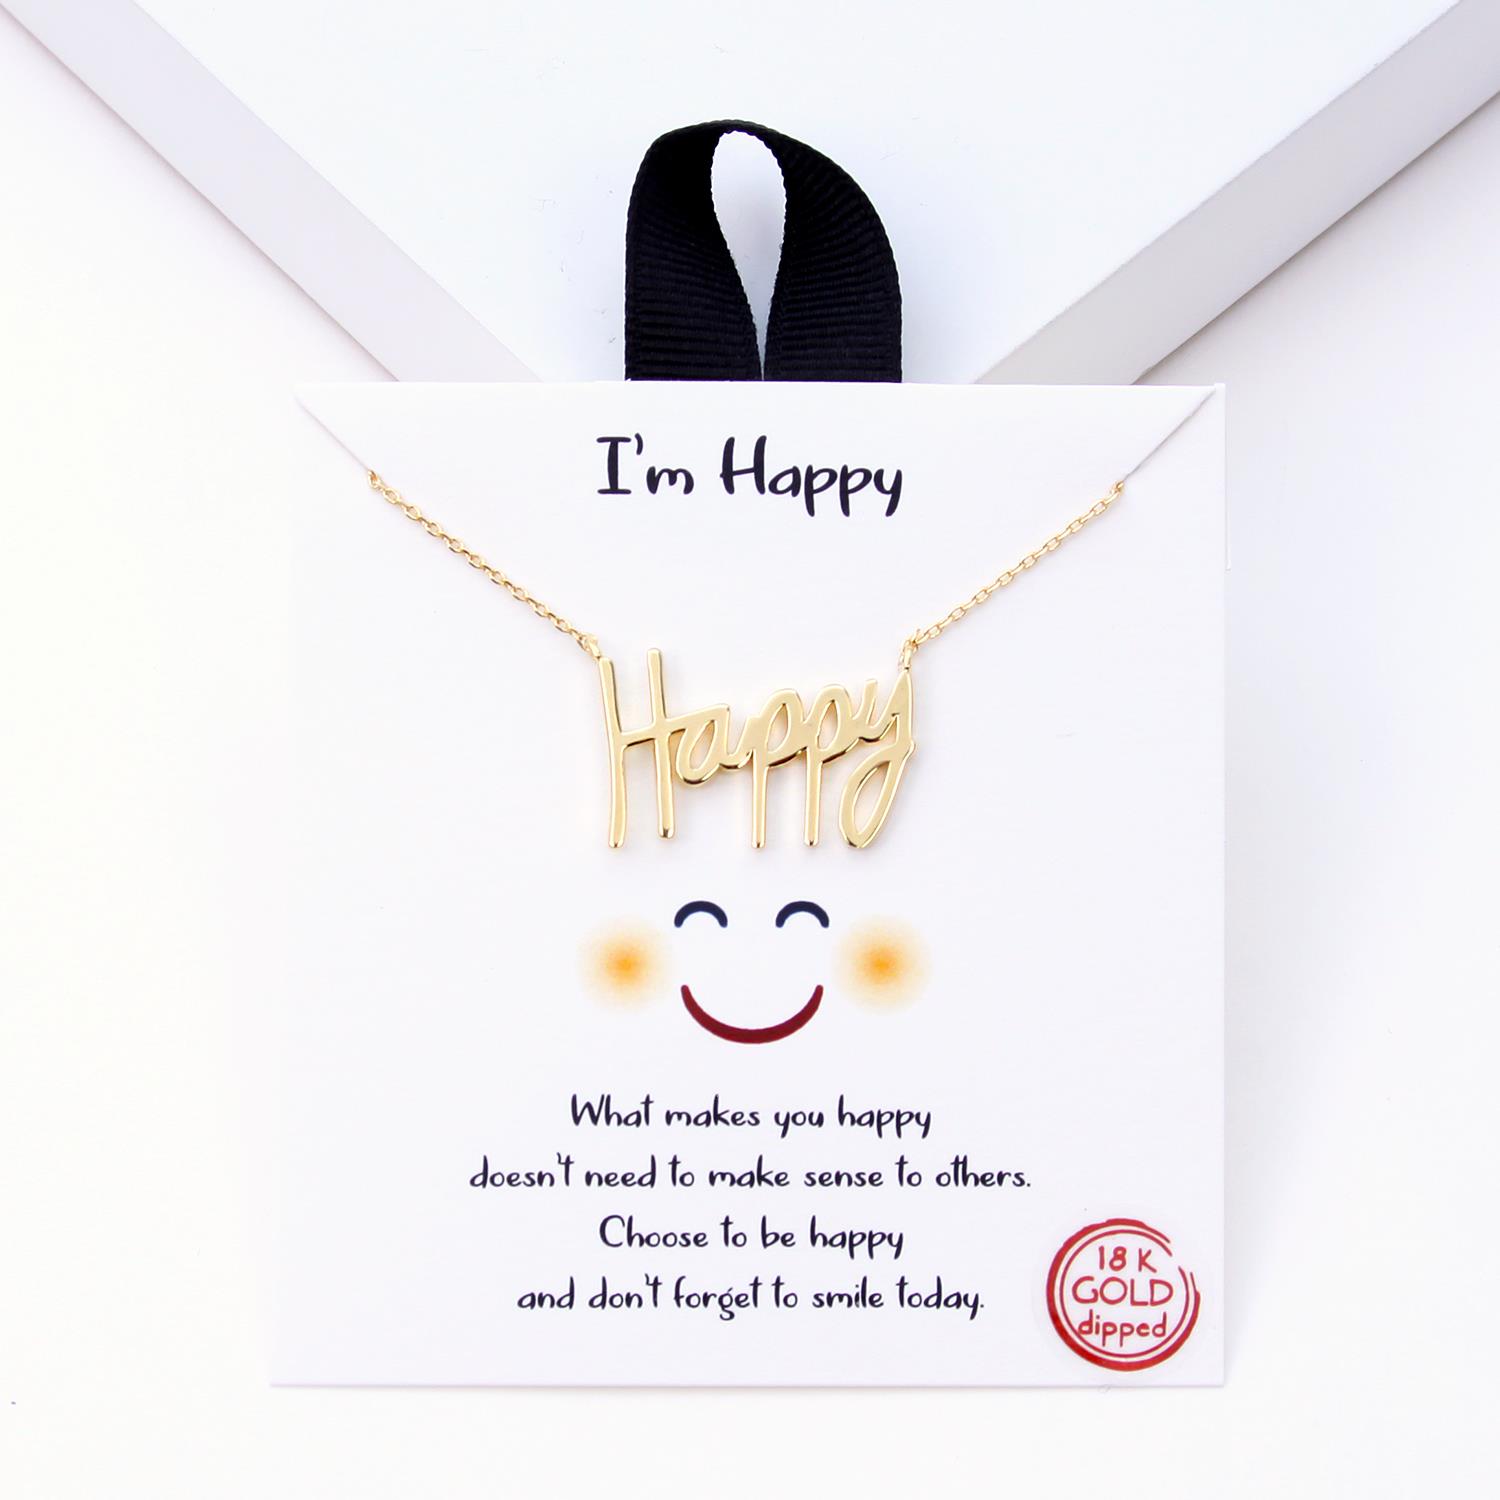 18K GOLD RHODIUM DIPPED I’M HAPPY NECKLACE